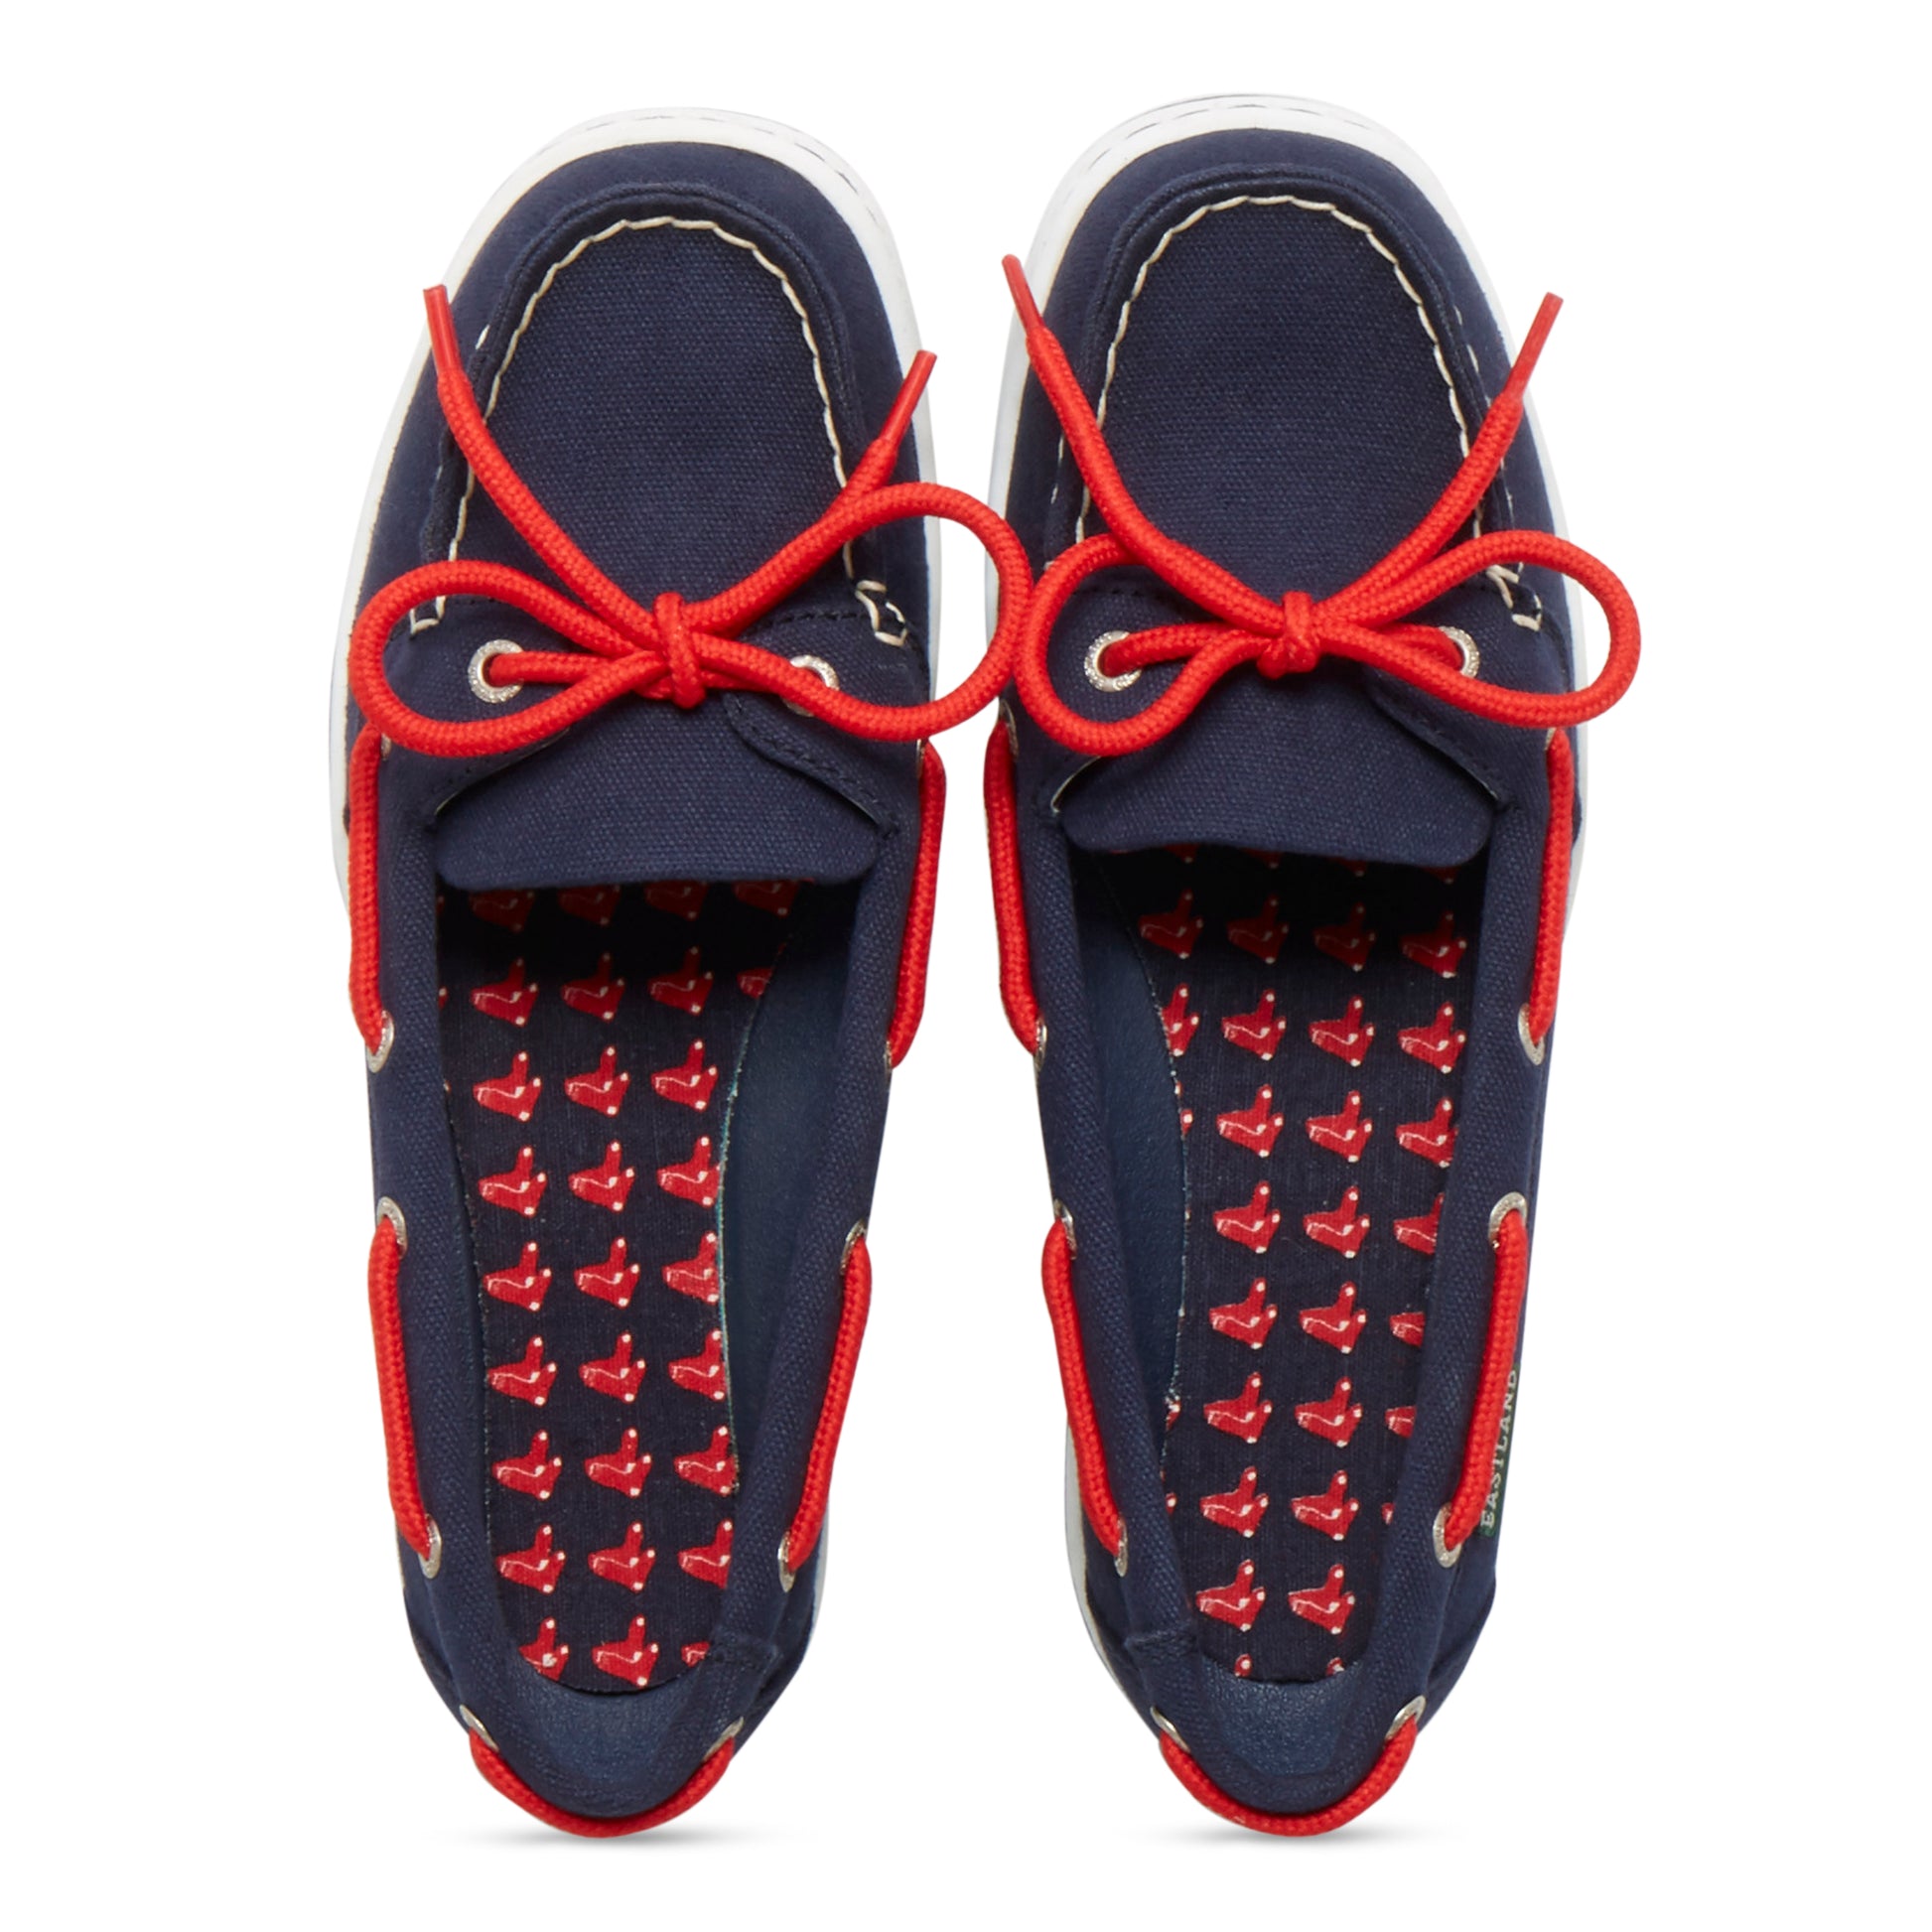 Women's Canvas Boat Shoes - Sunset MLB Boston Red Sox – Eastland